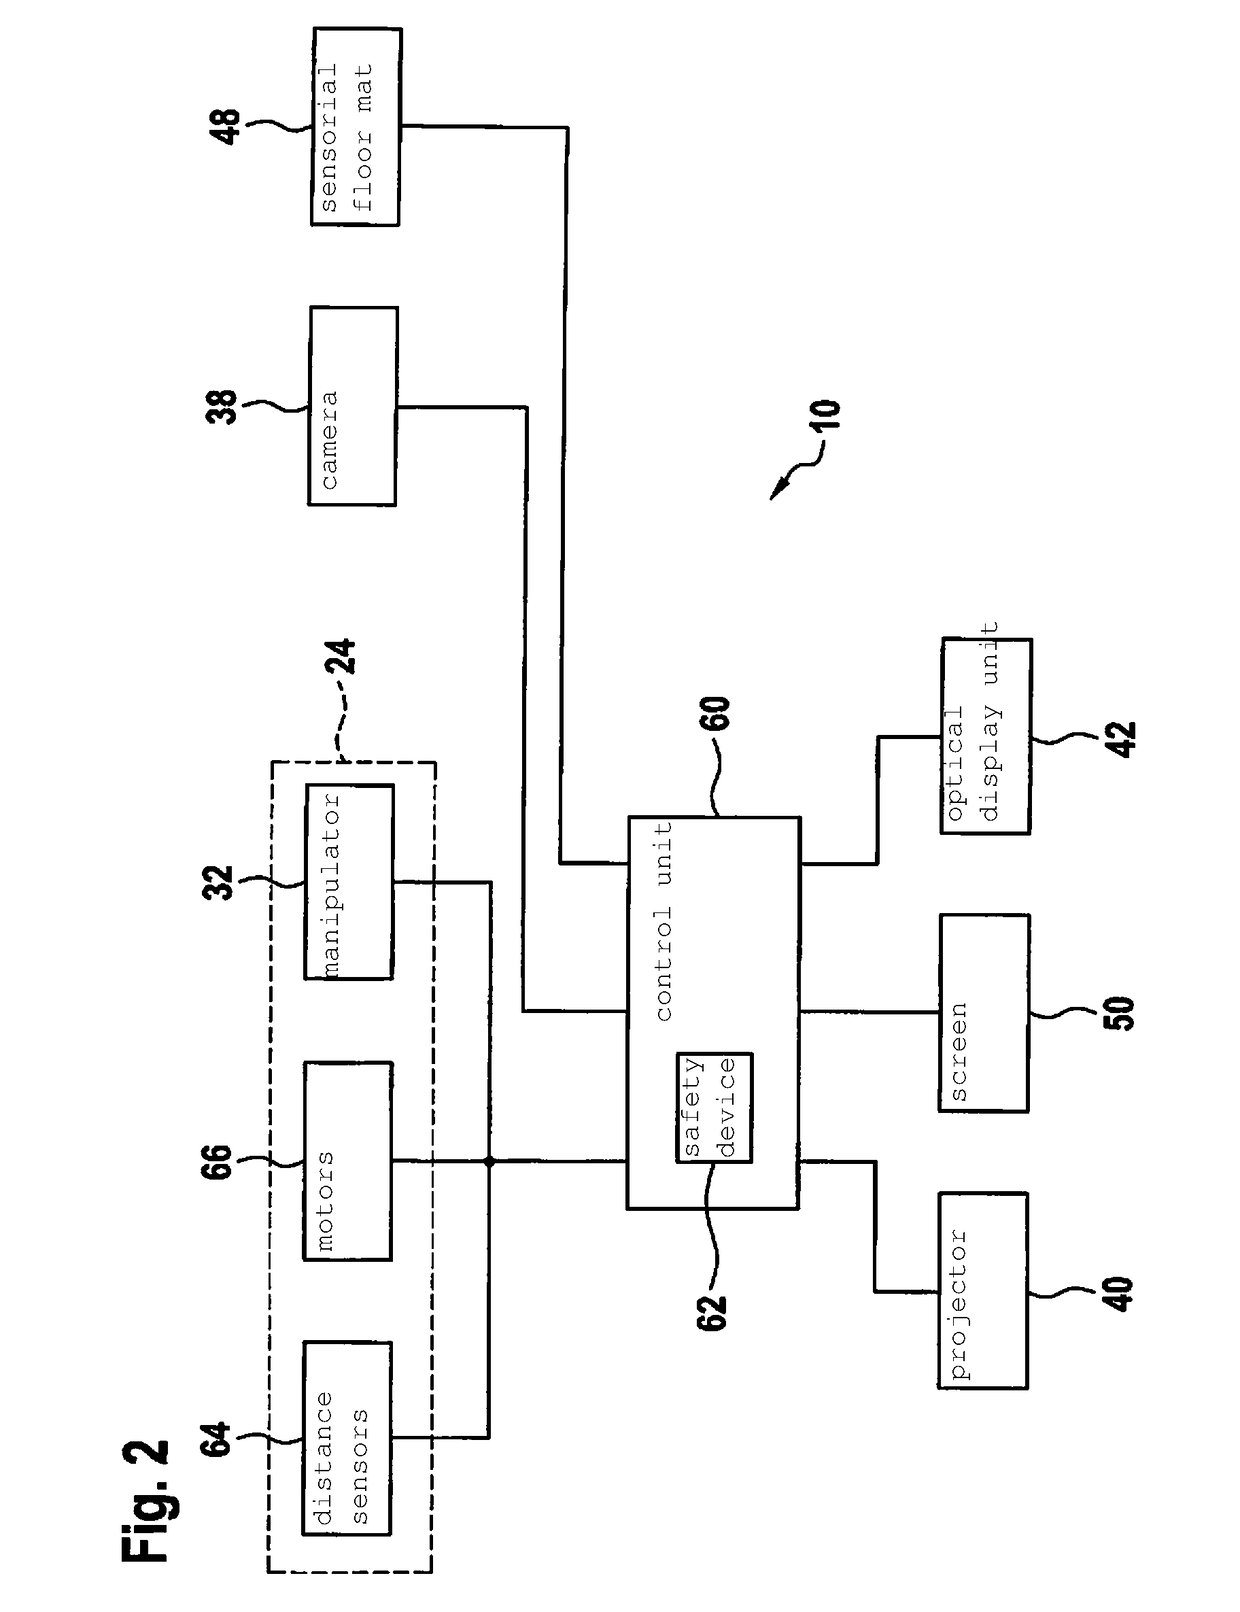 Manual work station and control unit for controlling the sequencing of a manual work station